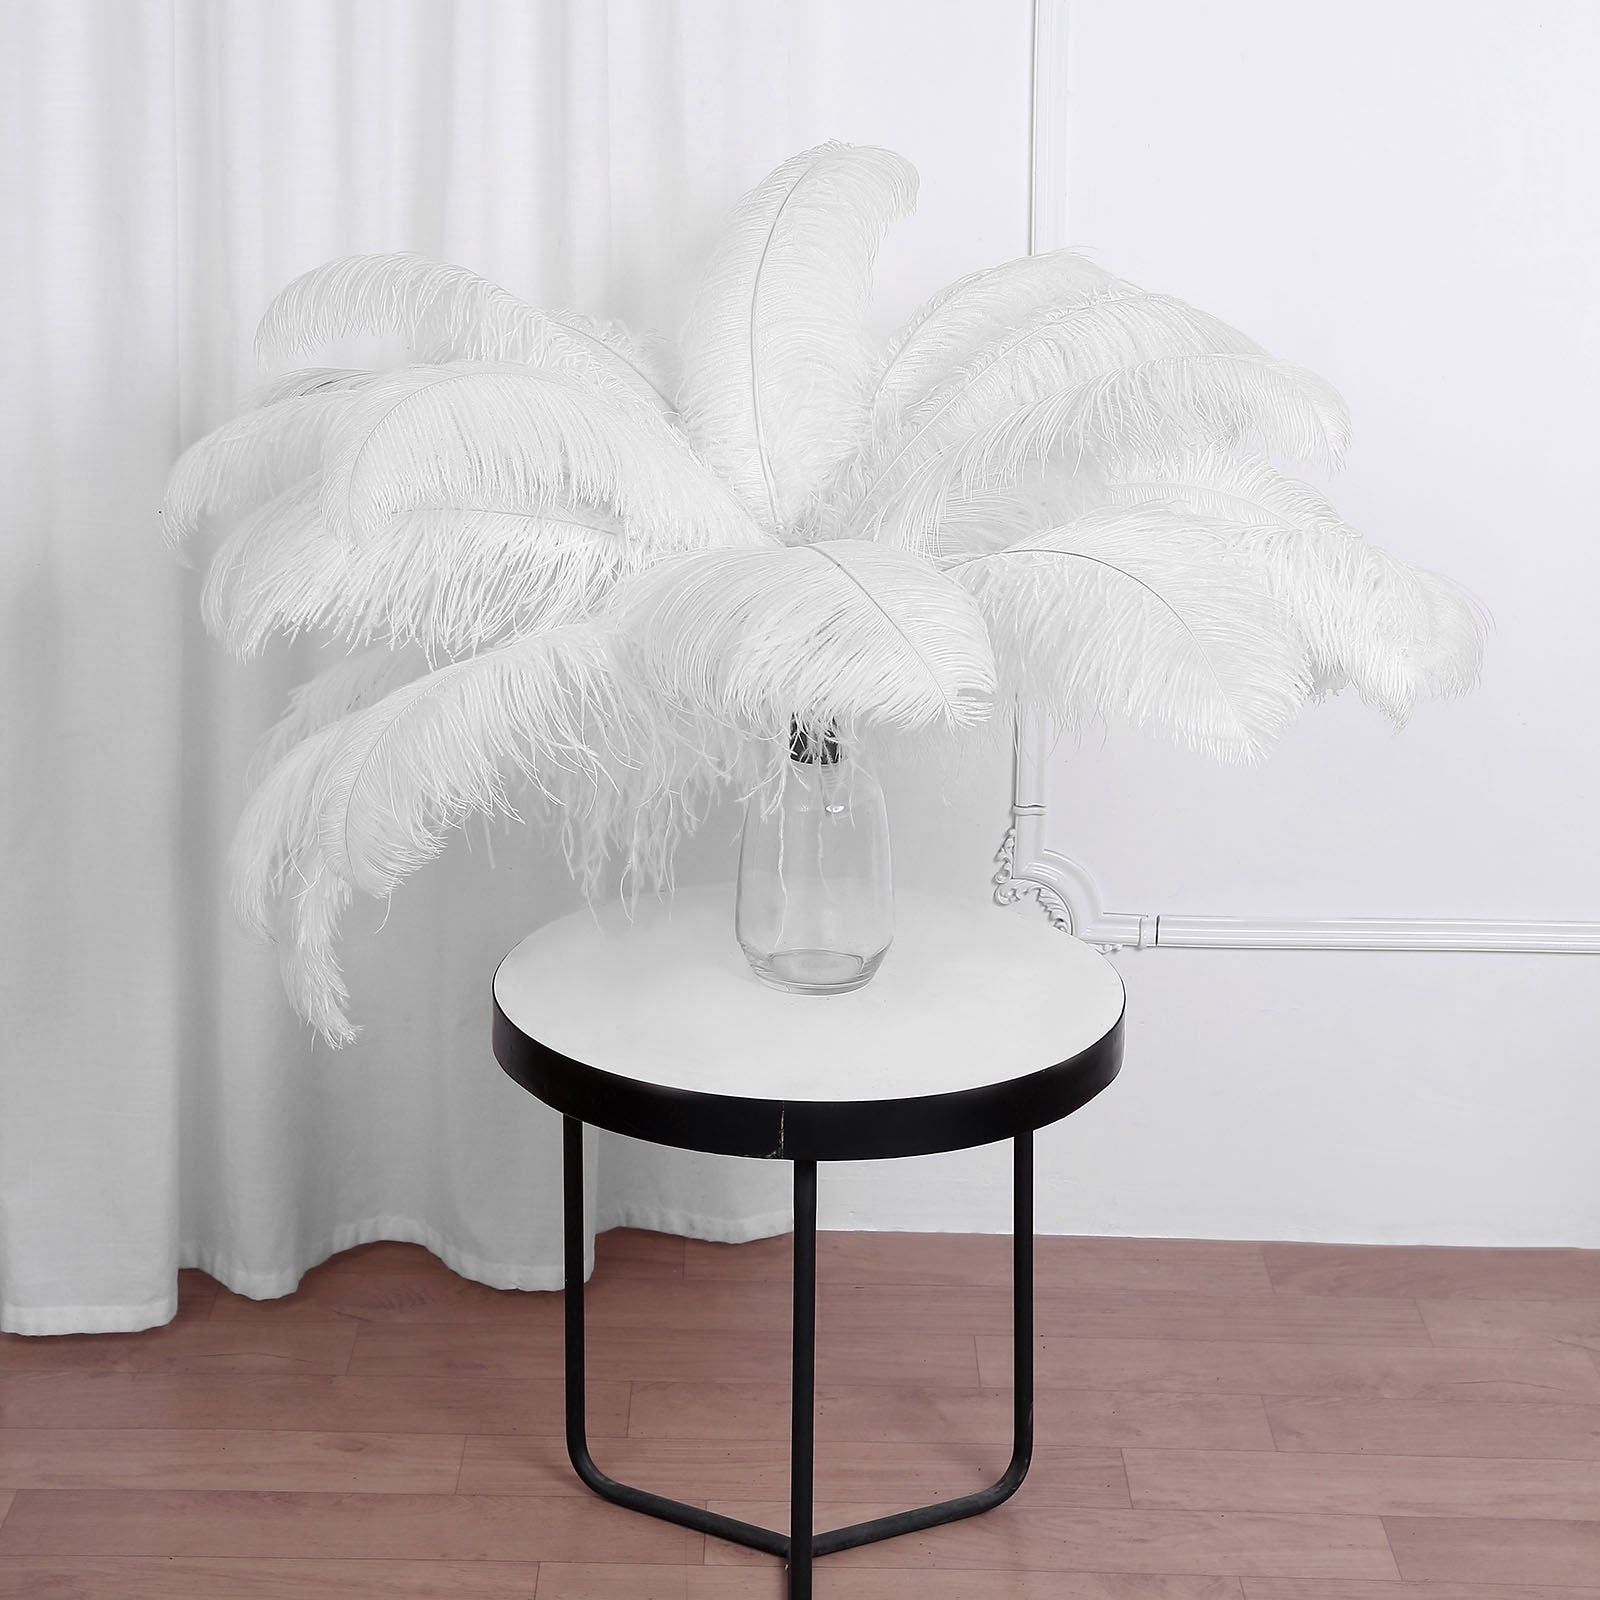 White Ostrich Feathers - 24 Pc.